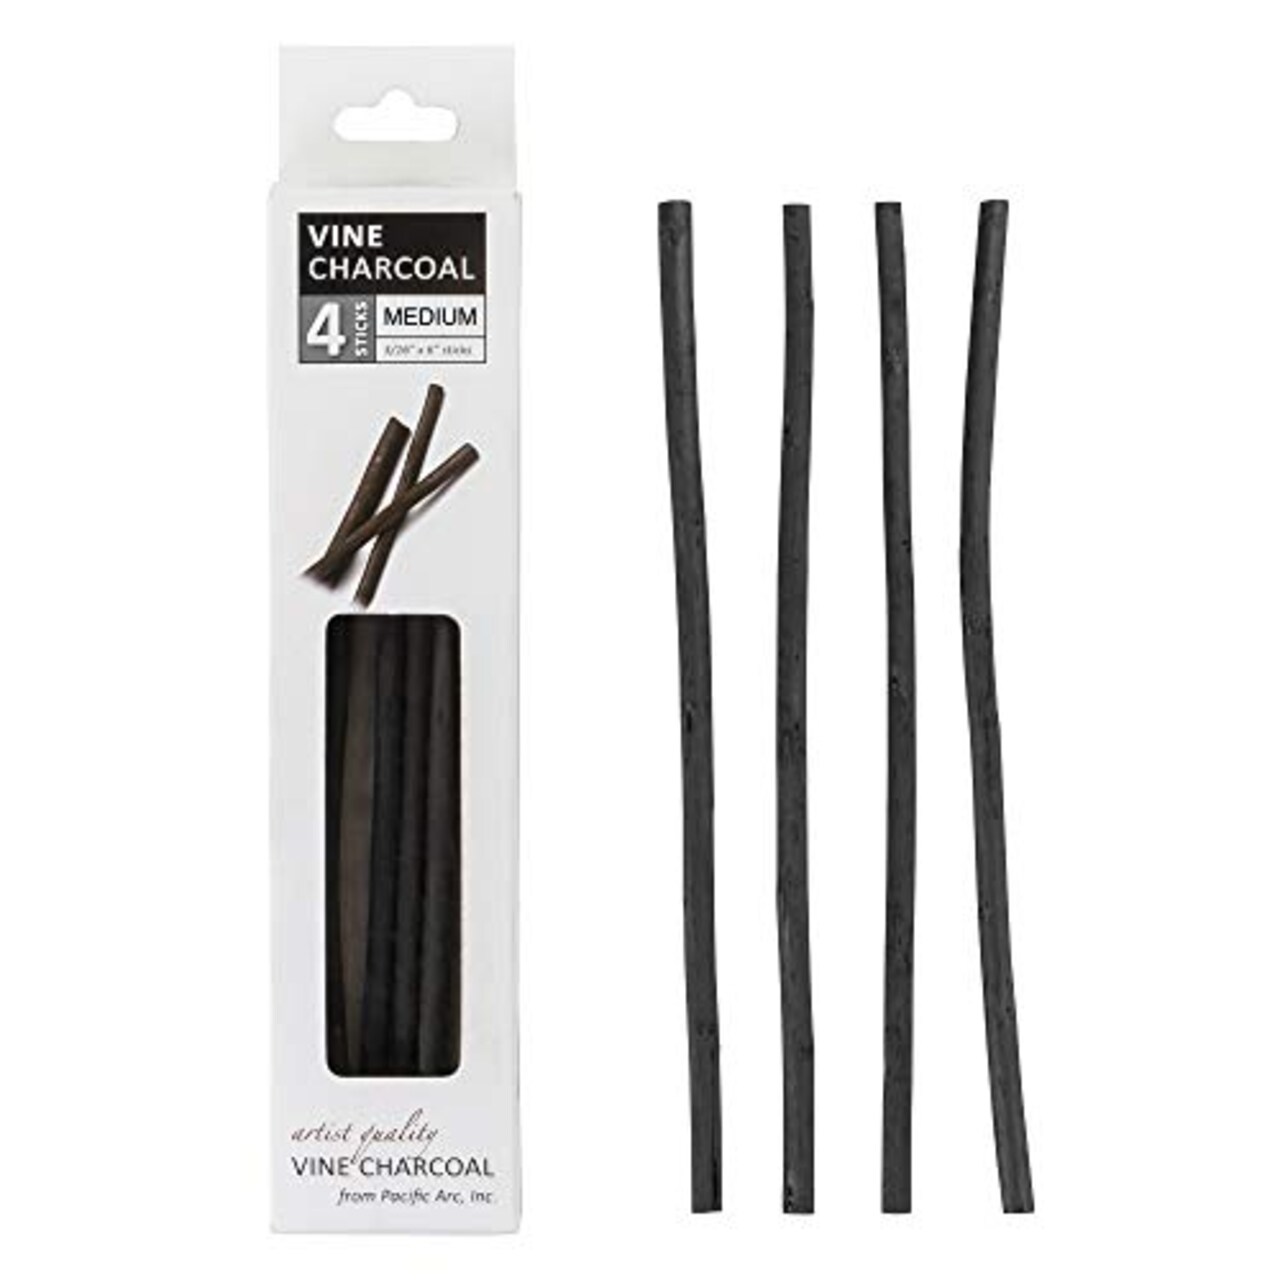 Pacific Arc Artist Vine Charcoal, Medium, Black 4 Charcoal Sticks for  Drawing, Sketching, and Fine Art